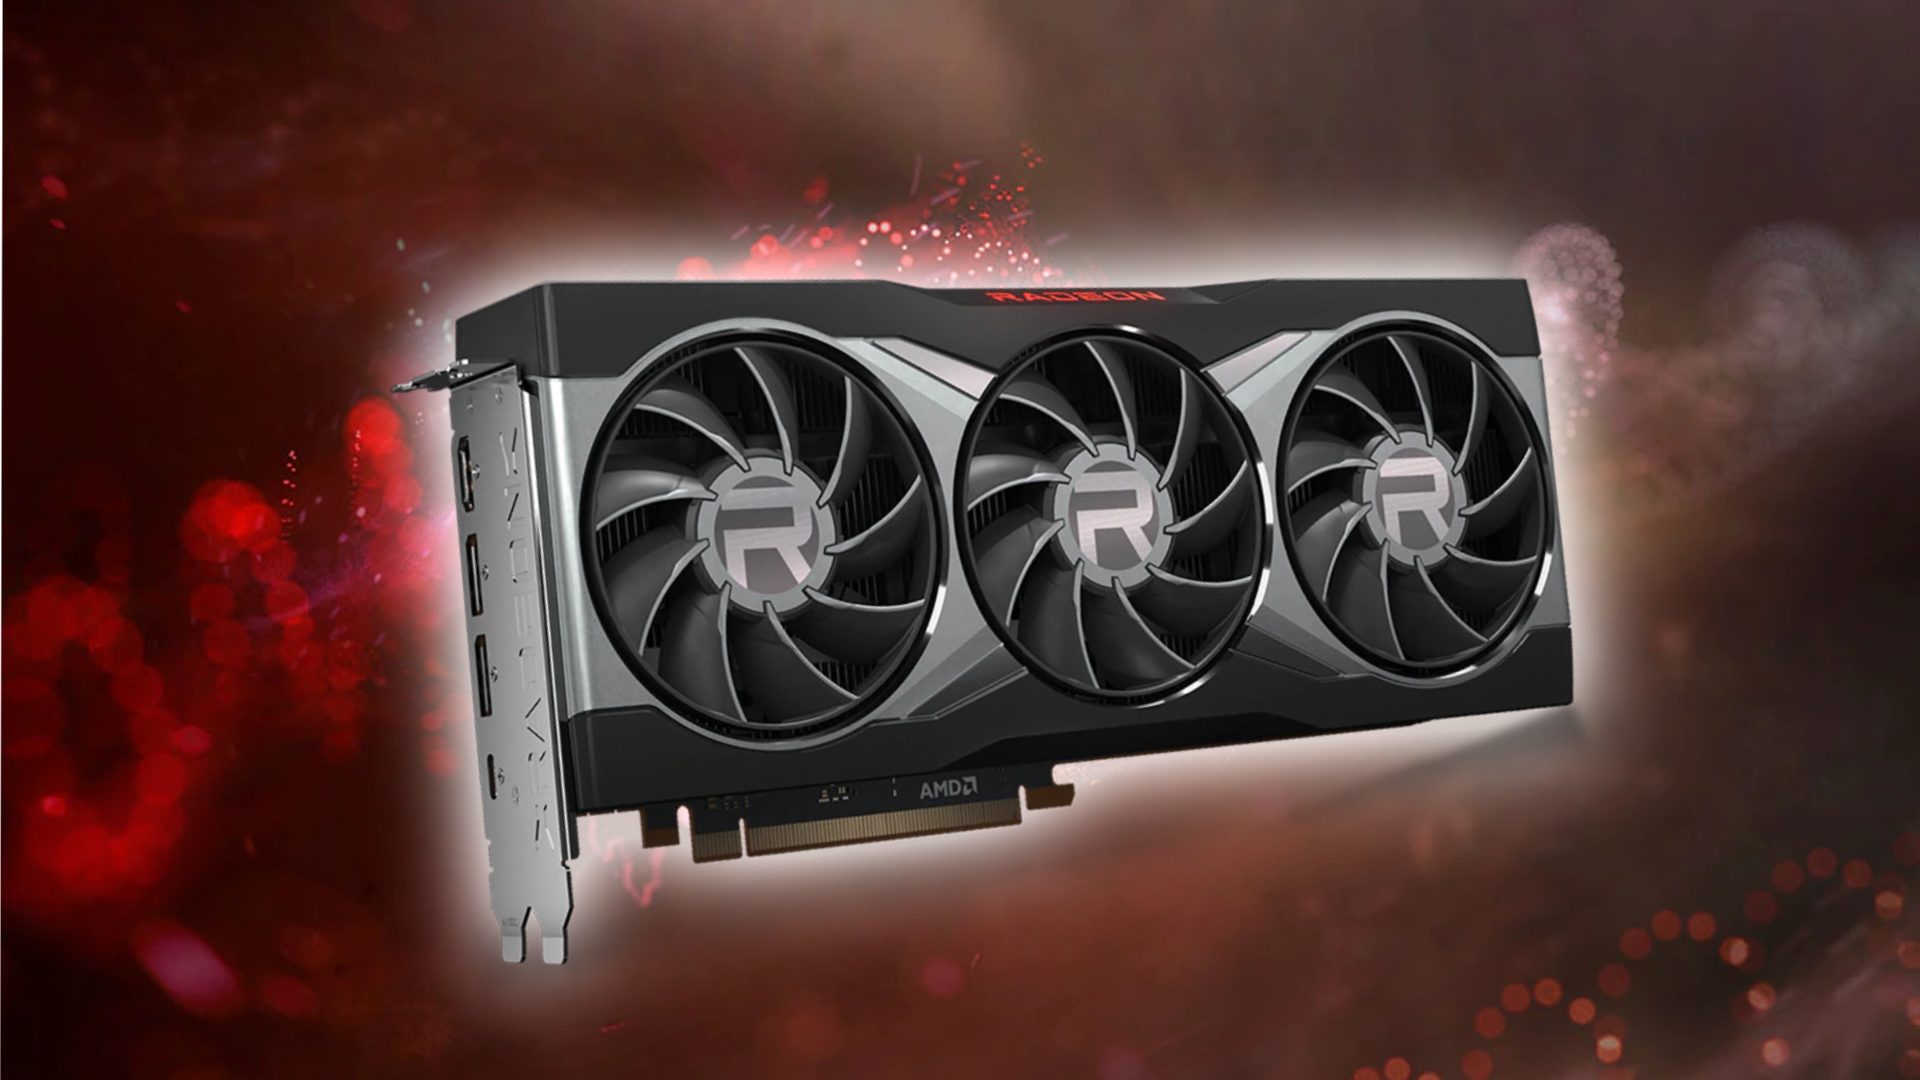 AMD Radeon RX 7900 XTX: Current gen graphics card with Radeon themed backdrop